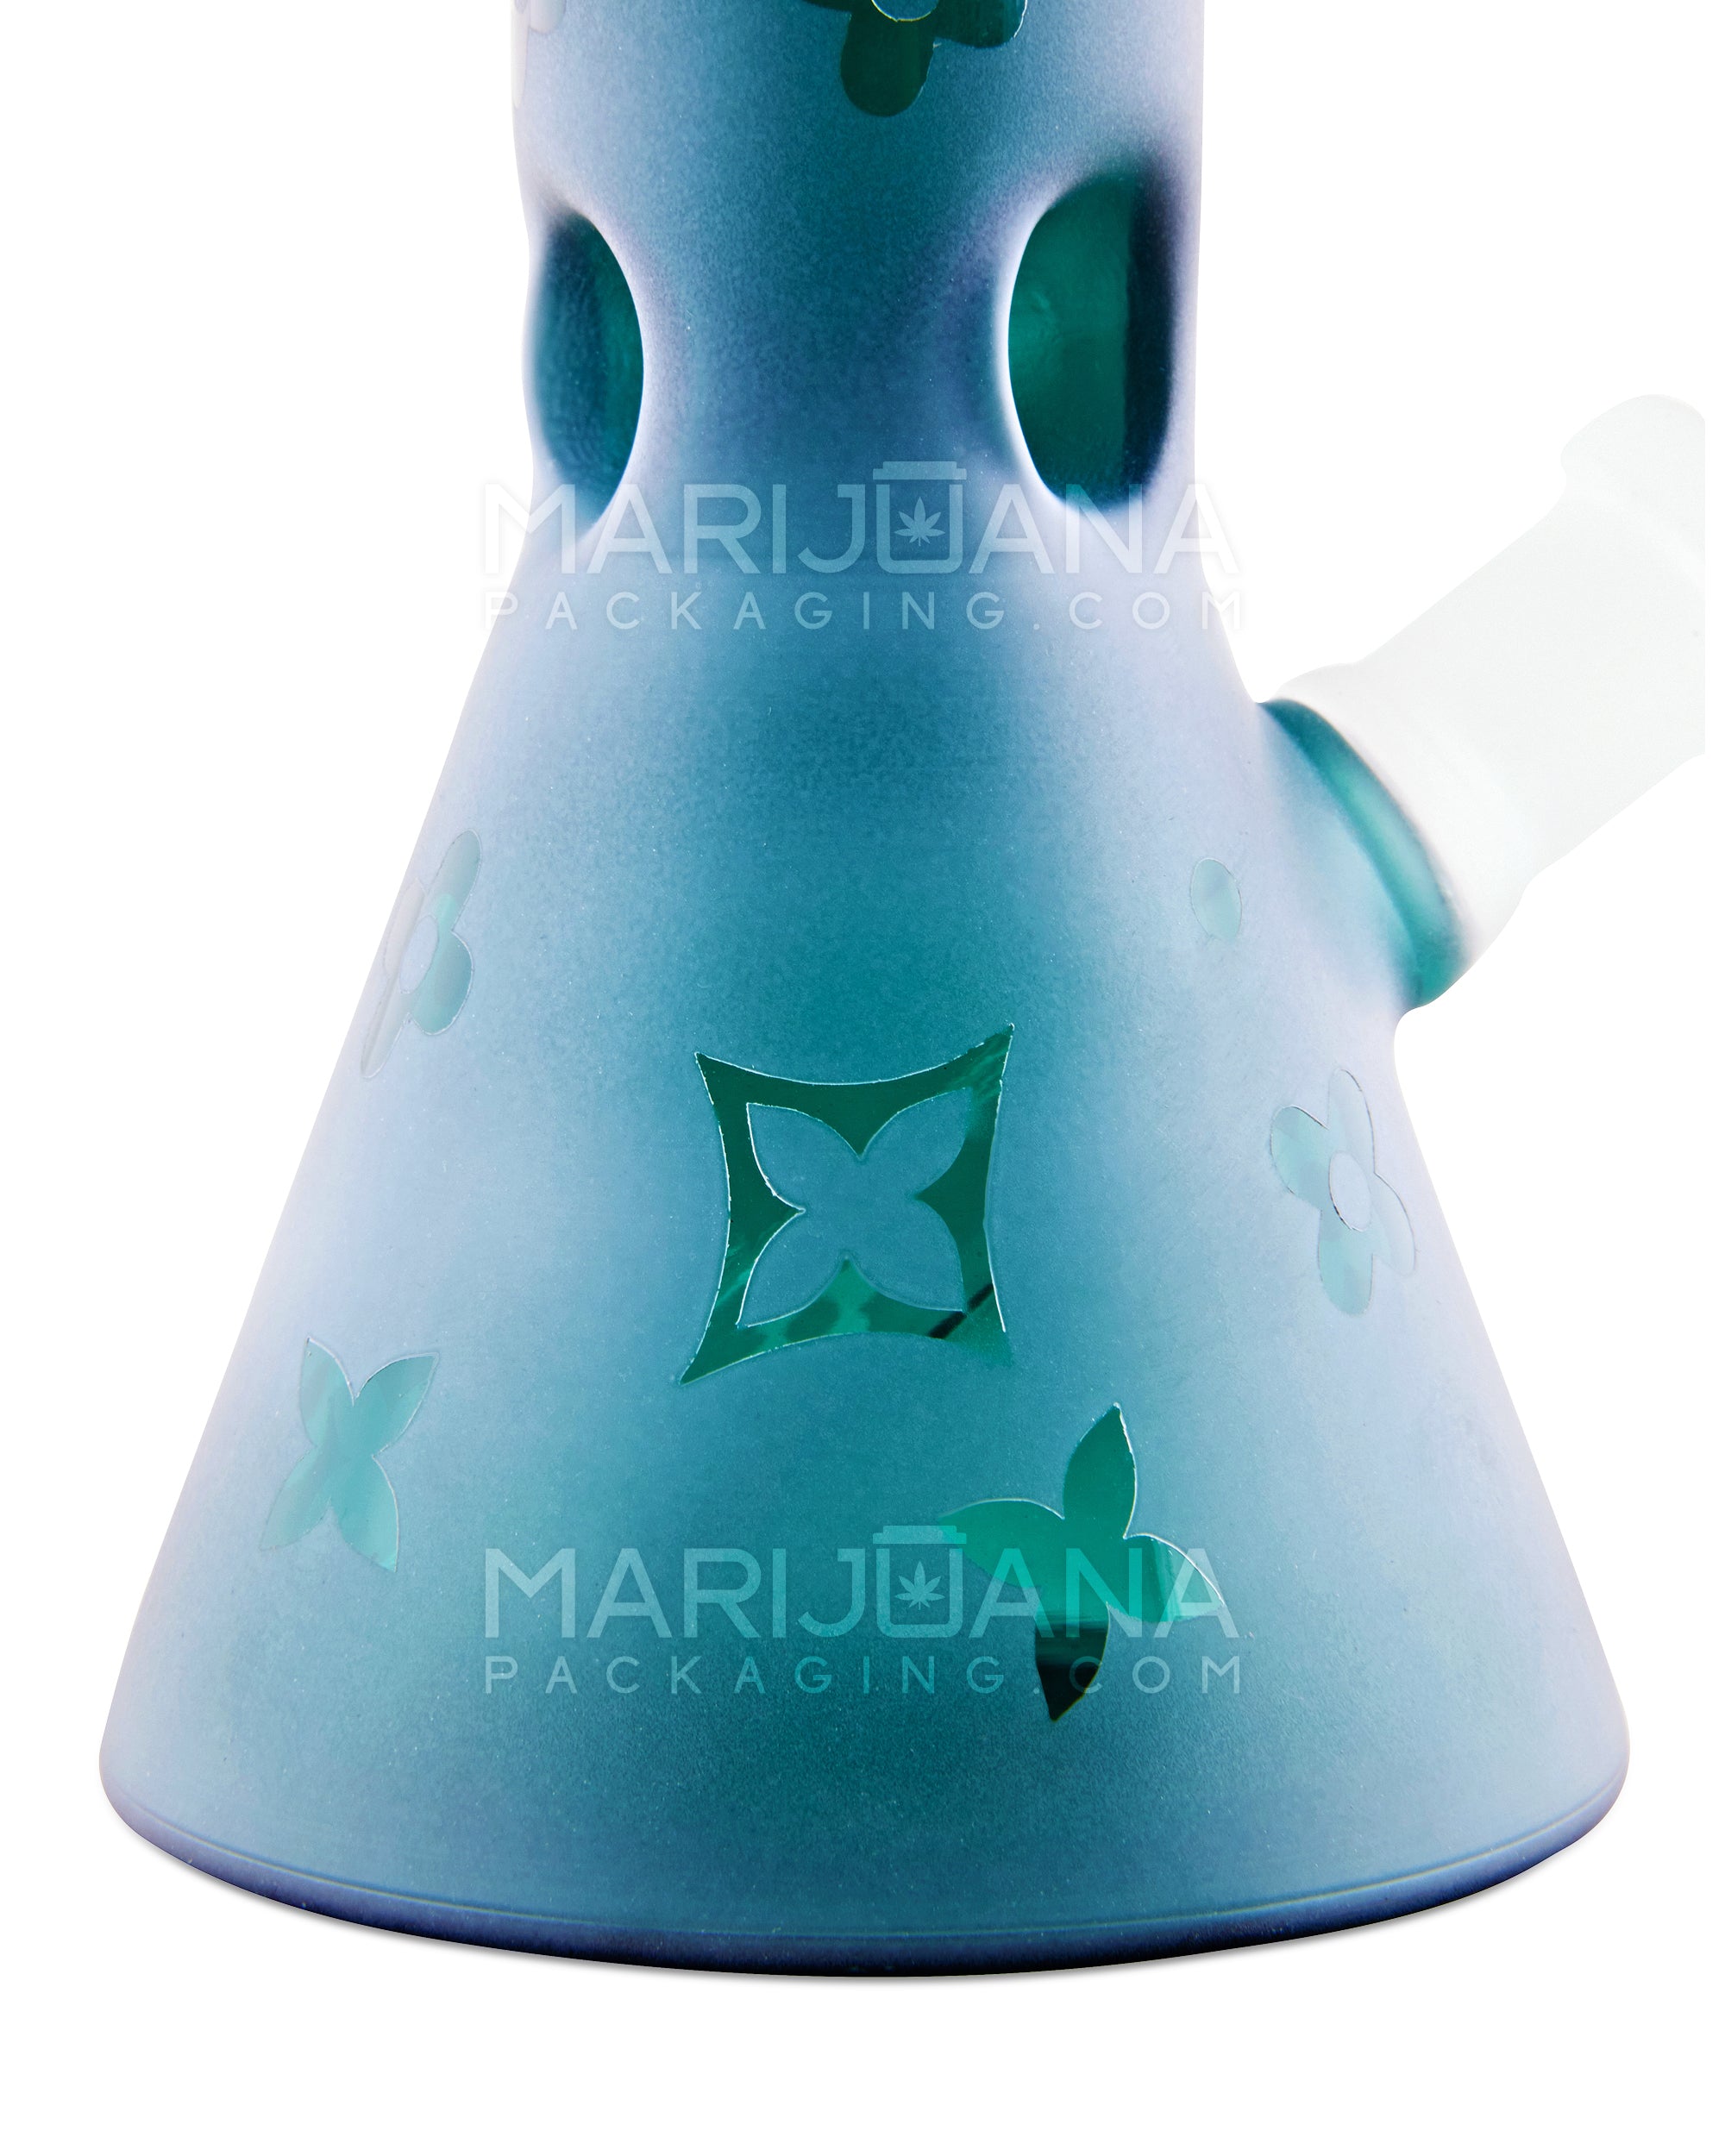 Straight Neck Frosted Shuriken Glass Mini Beaker Water Pipe w/ Ice Catcher | 6in Tall - 14mm Bowl - Teal